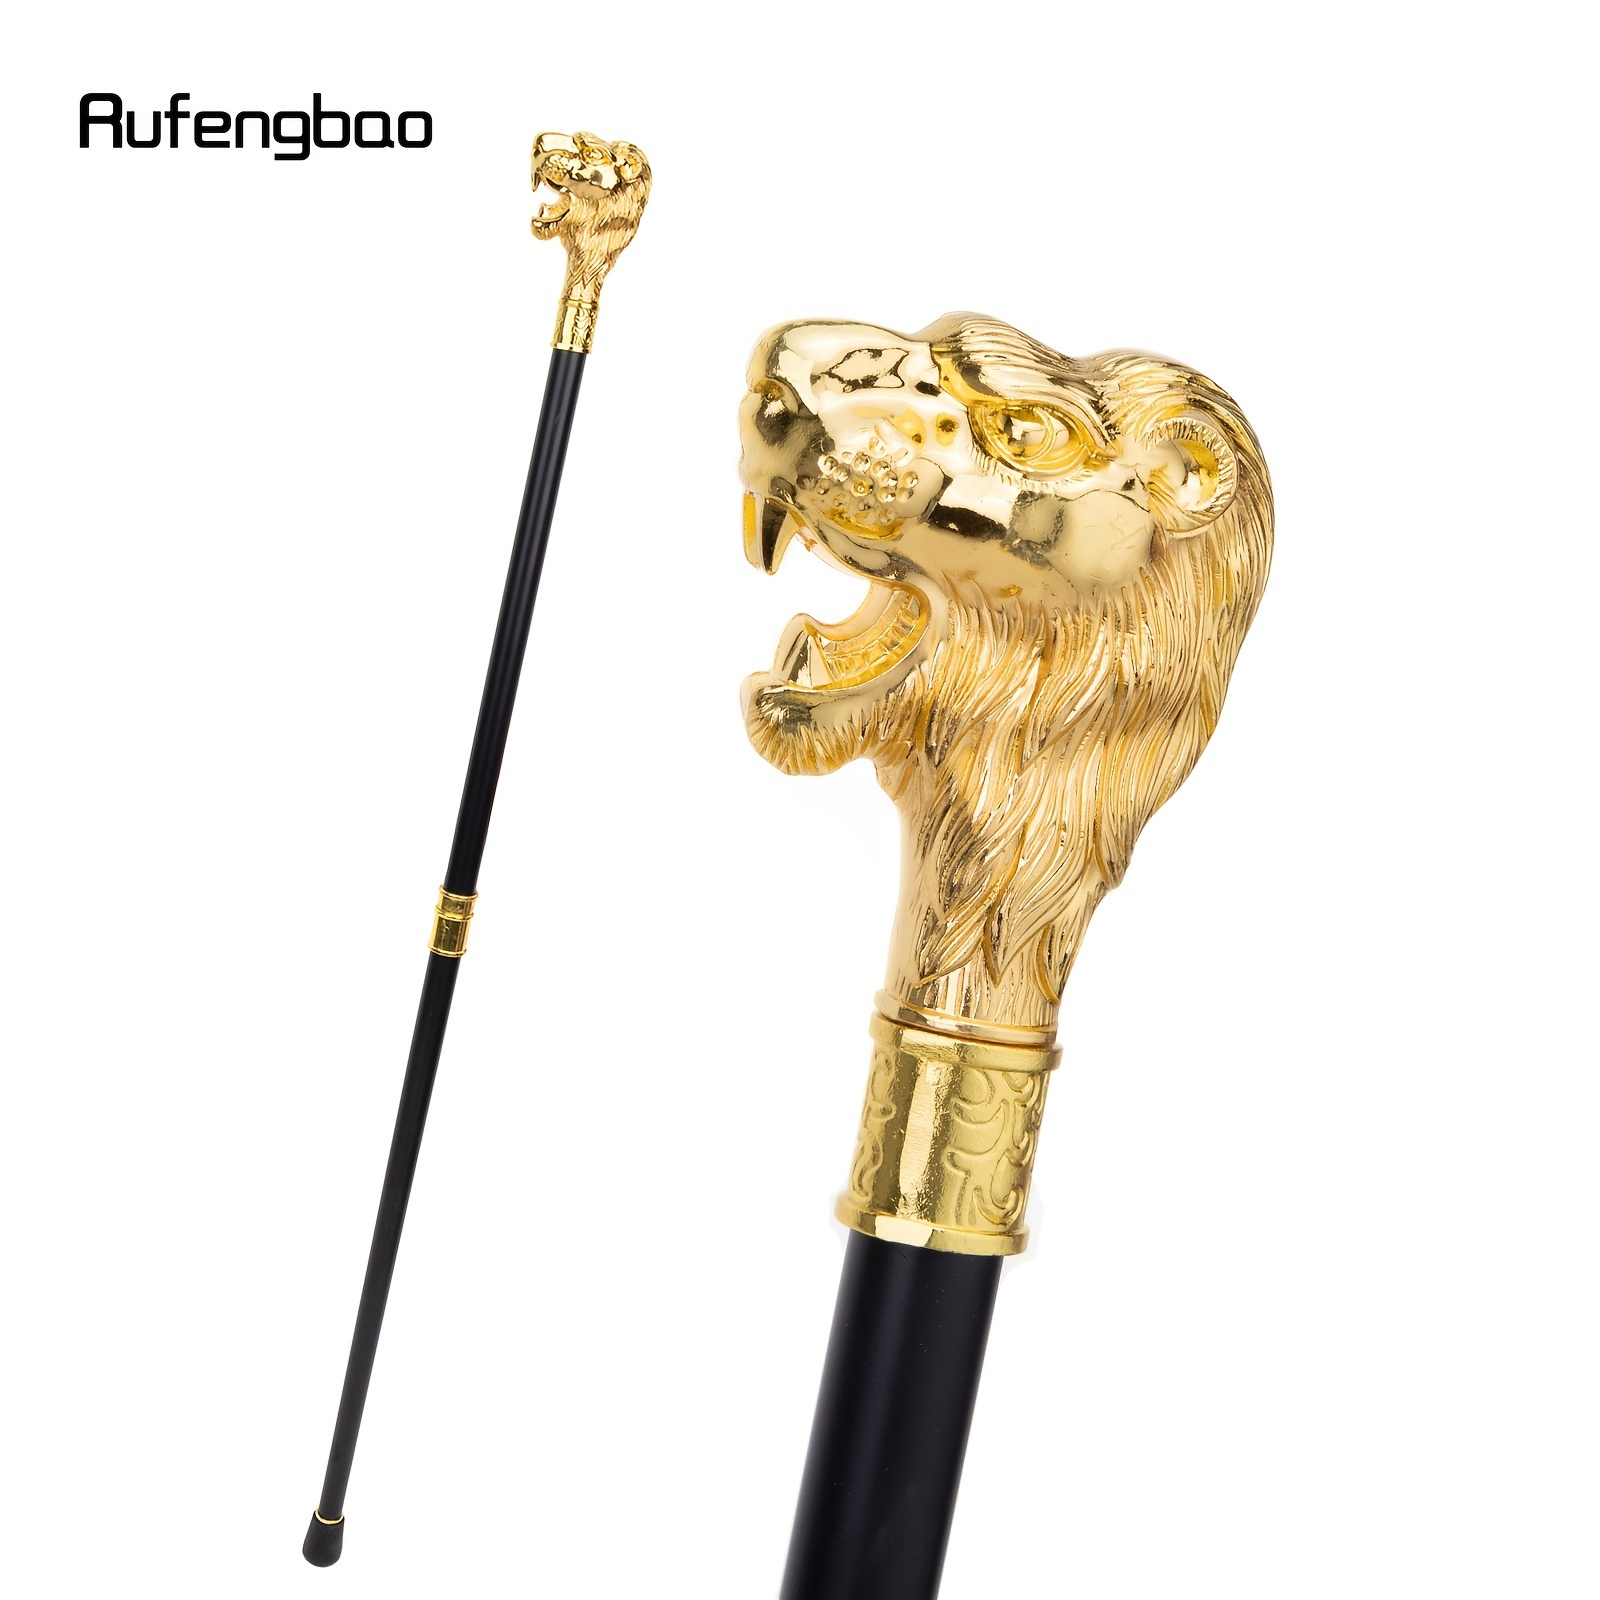 

Fashion Walking Stick Golden Lion Head With Mustache Decorative Cosplay Vintage Party Fashionable Walking Cane Crosier 36.6in, Ideal Choice For Gifts